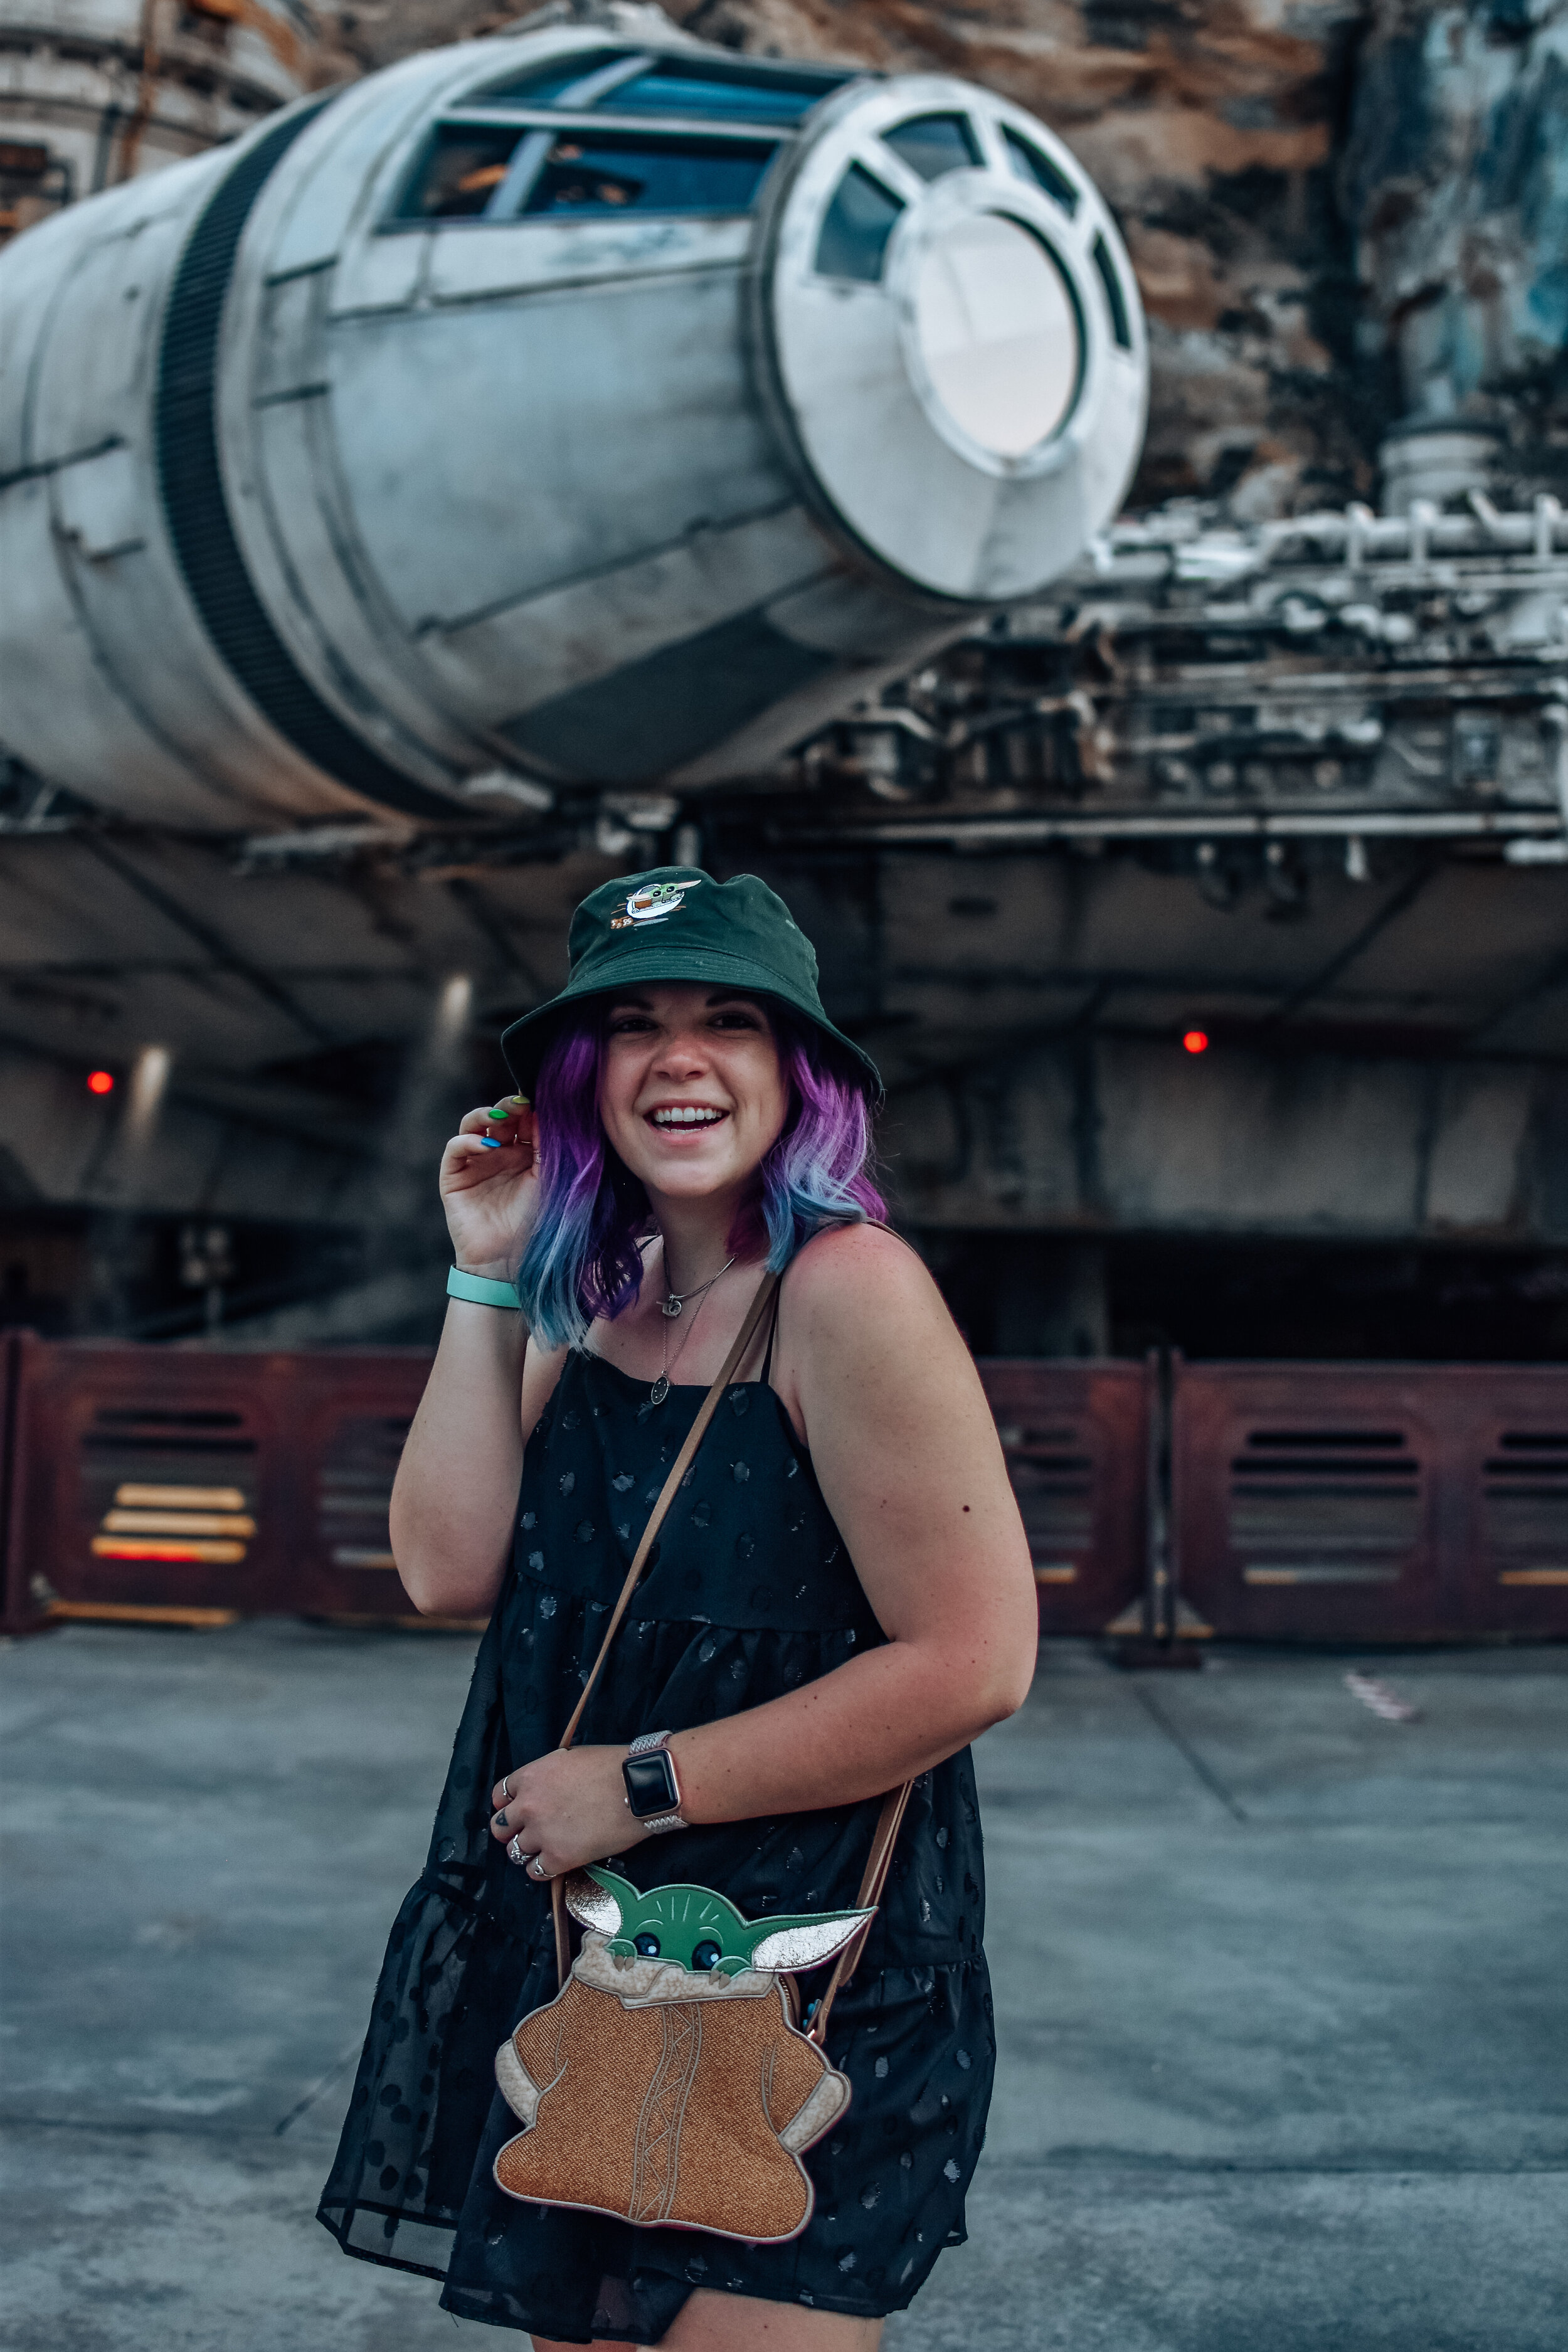 WHAT TO WEAR TO STAR WARS: GALAXY'S EDGE